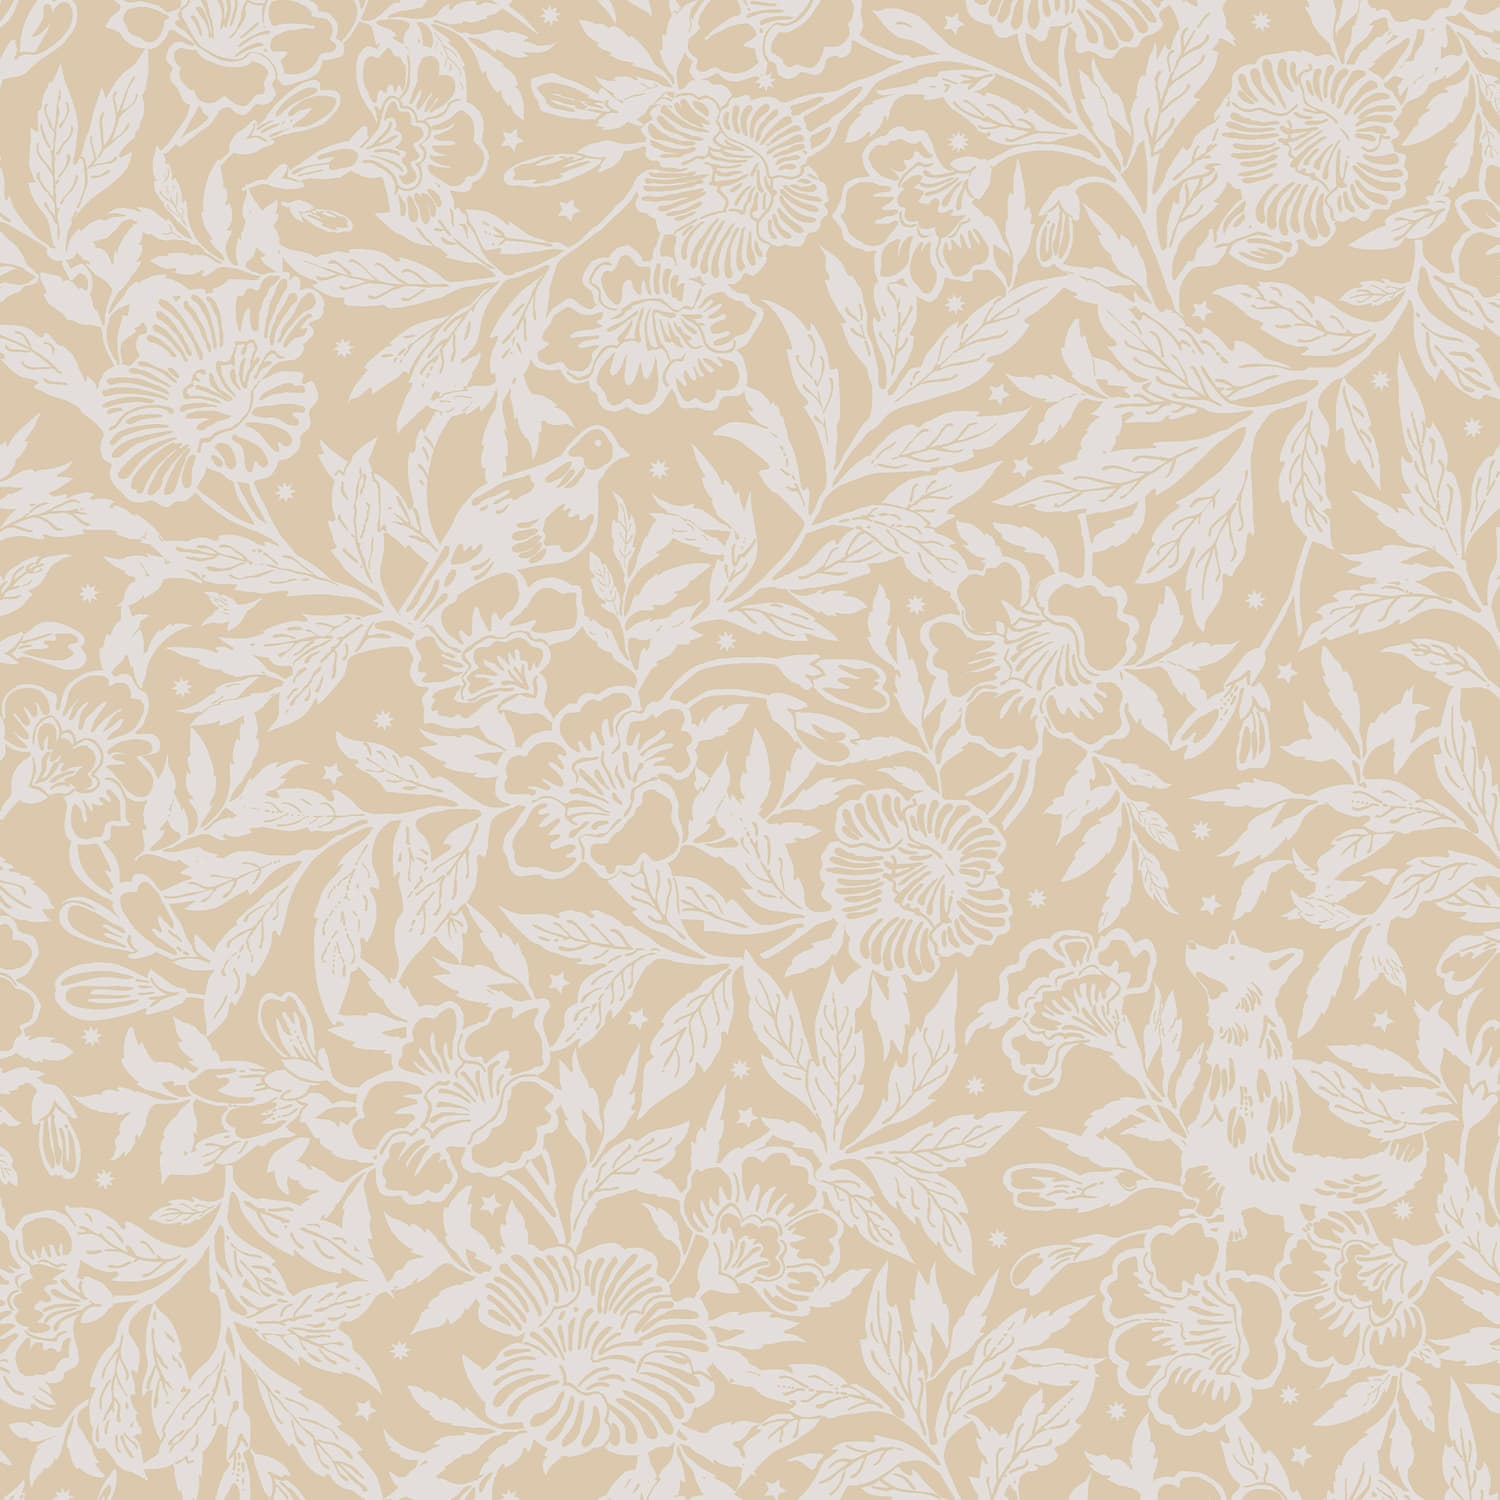 Joules Twilight Ditsy Creme Wallpaper